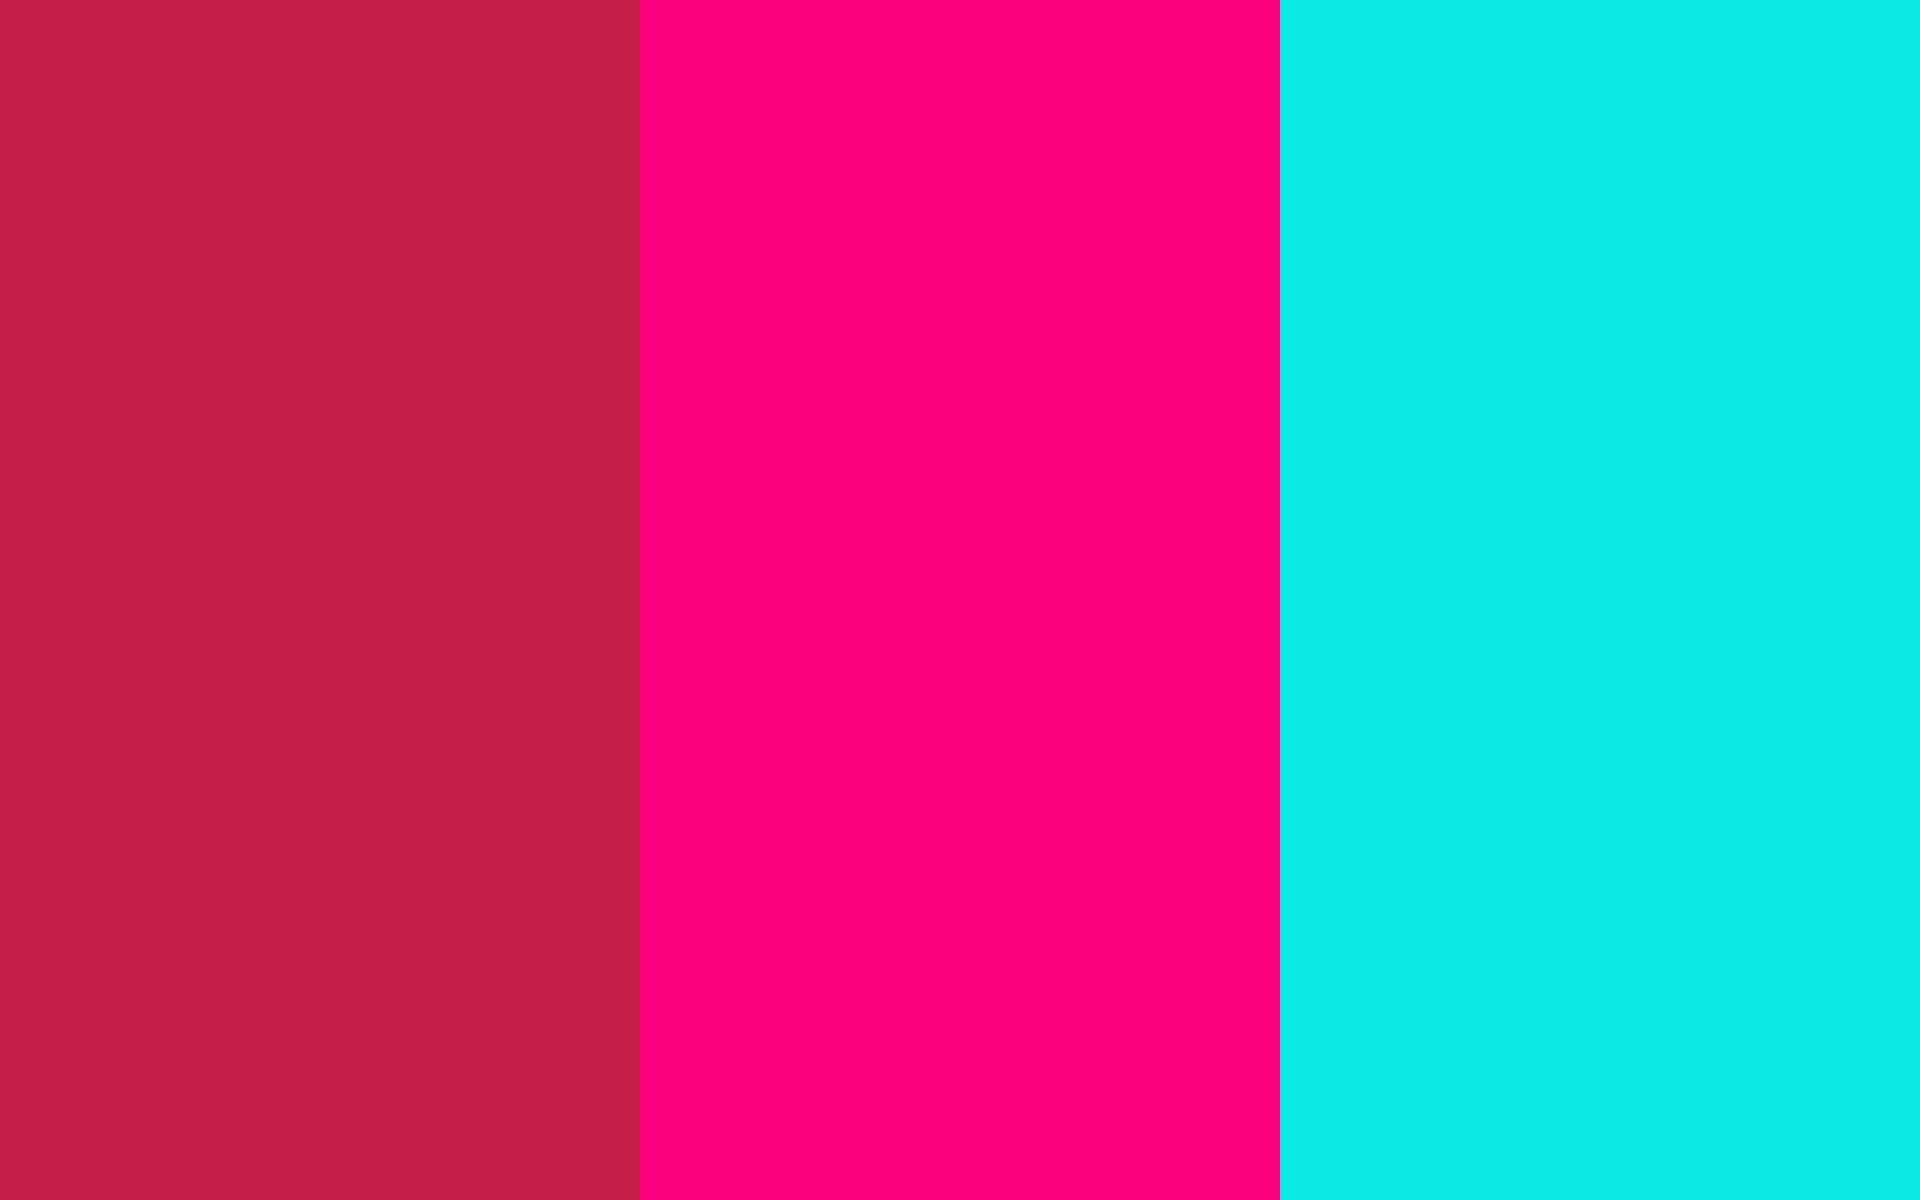 Bright Maroon Pink And Turquoise Three Color Background